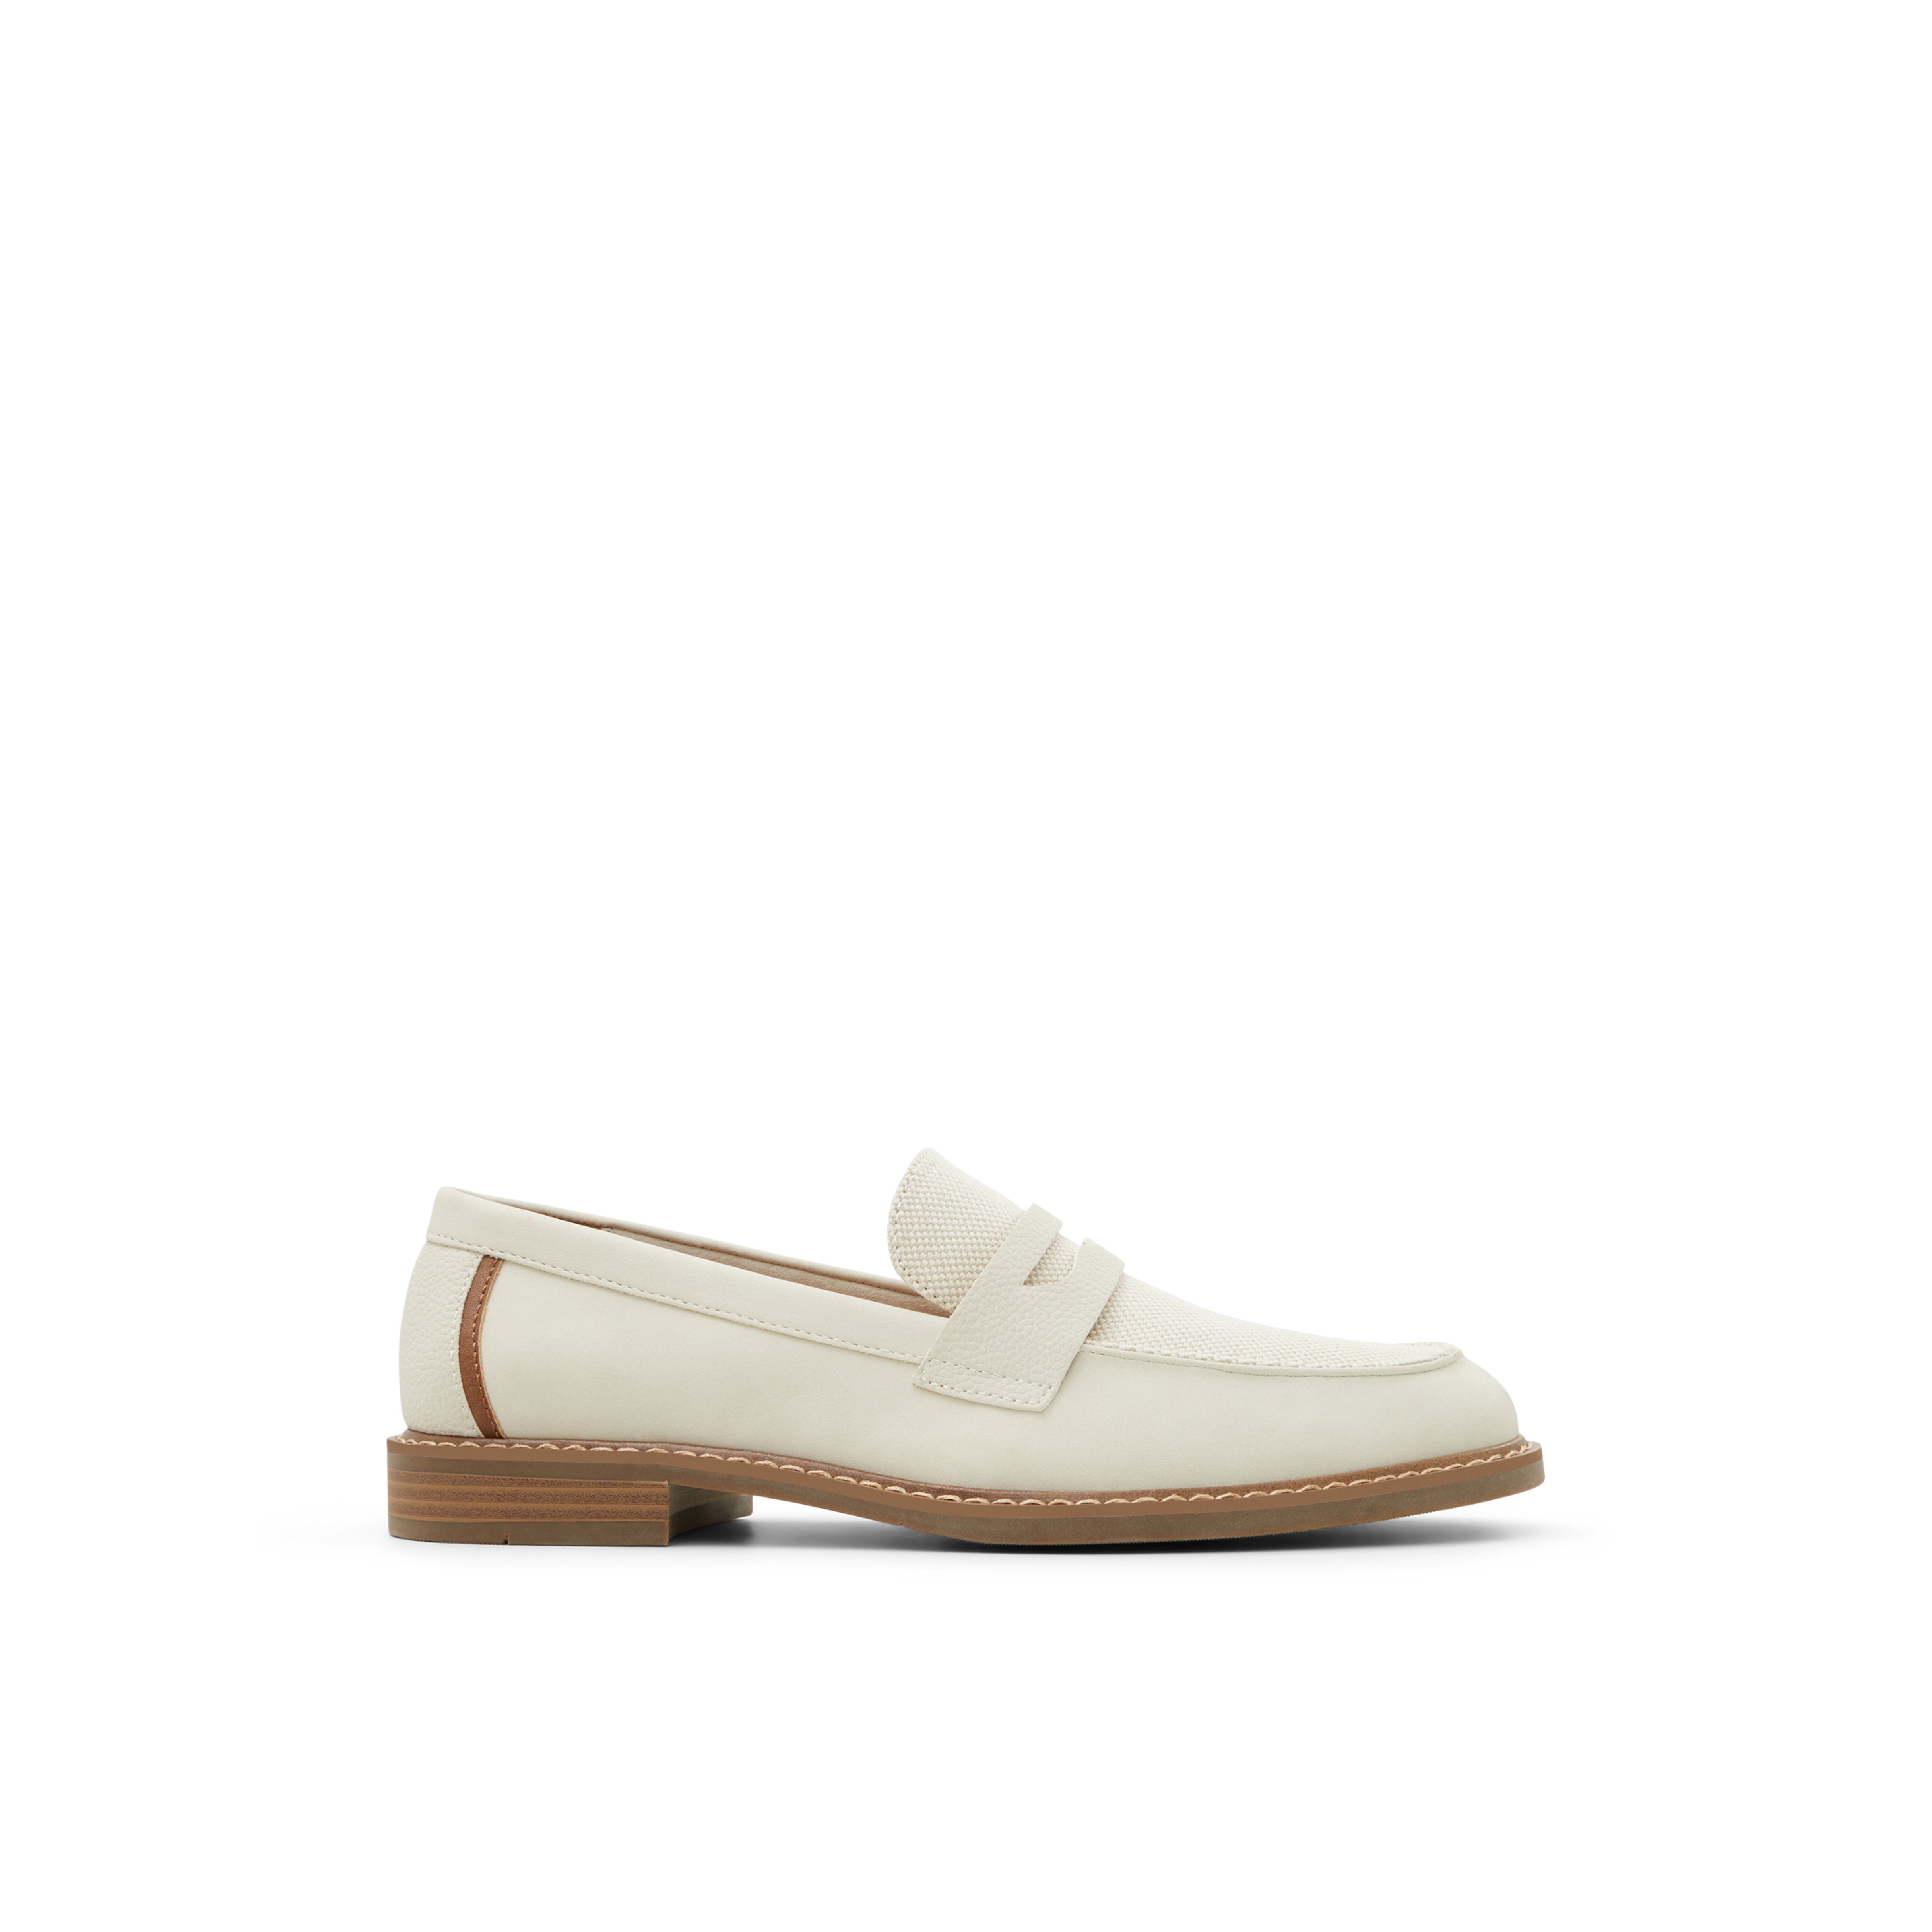 Apolo Penny loafers